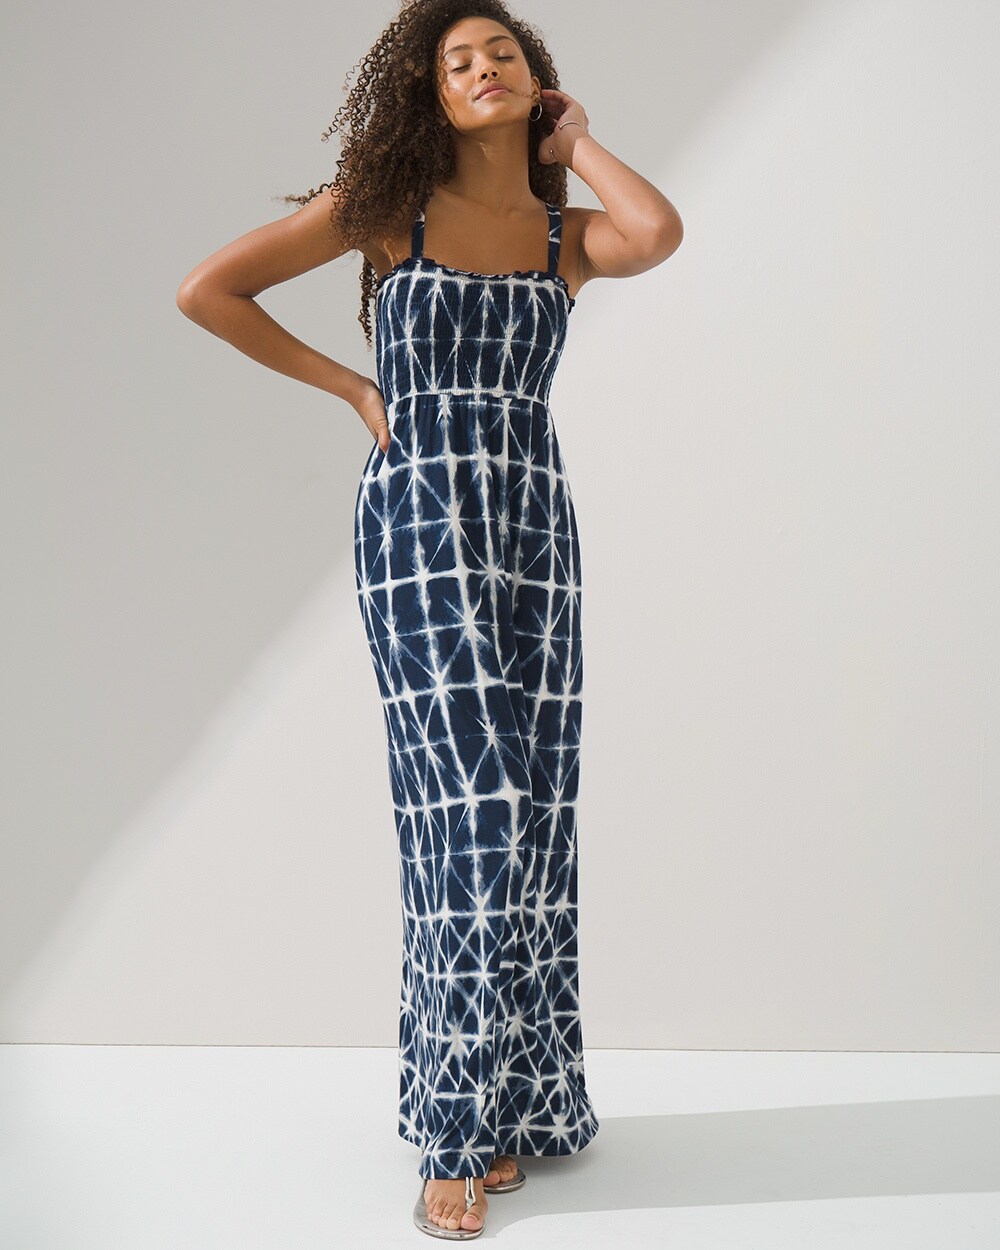 Soft Jersey Smocked Maxi Dress with Built-In Bra